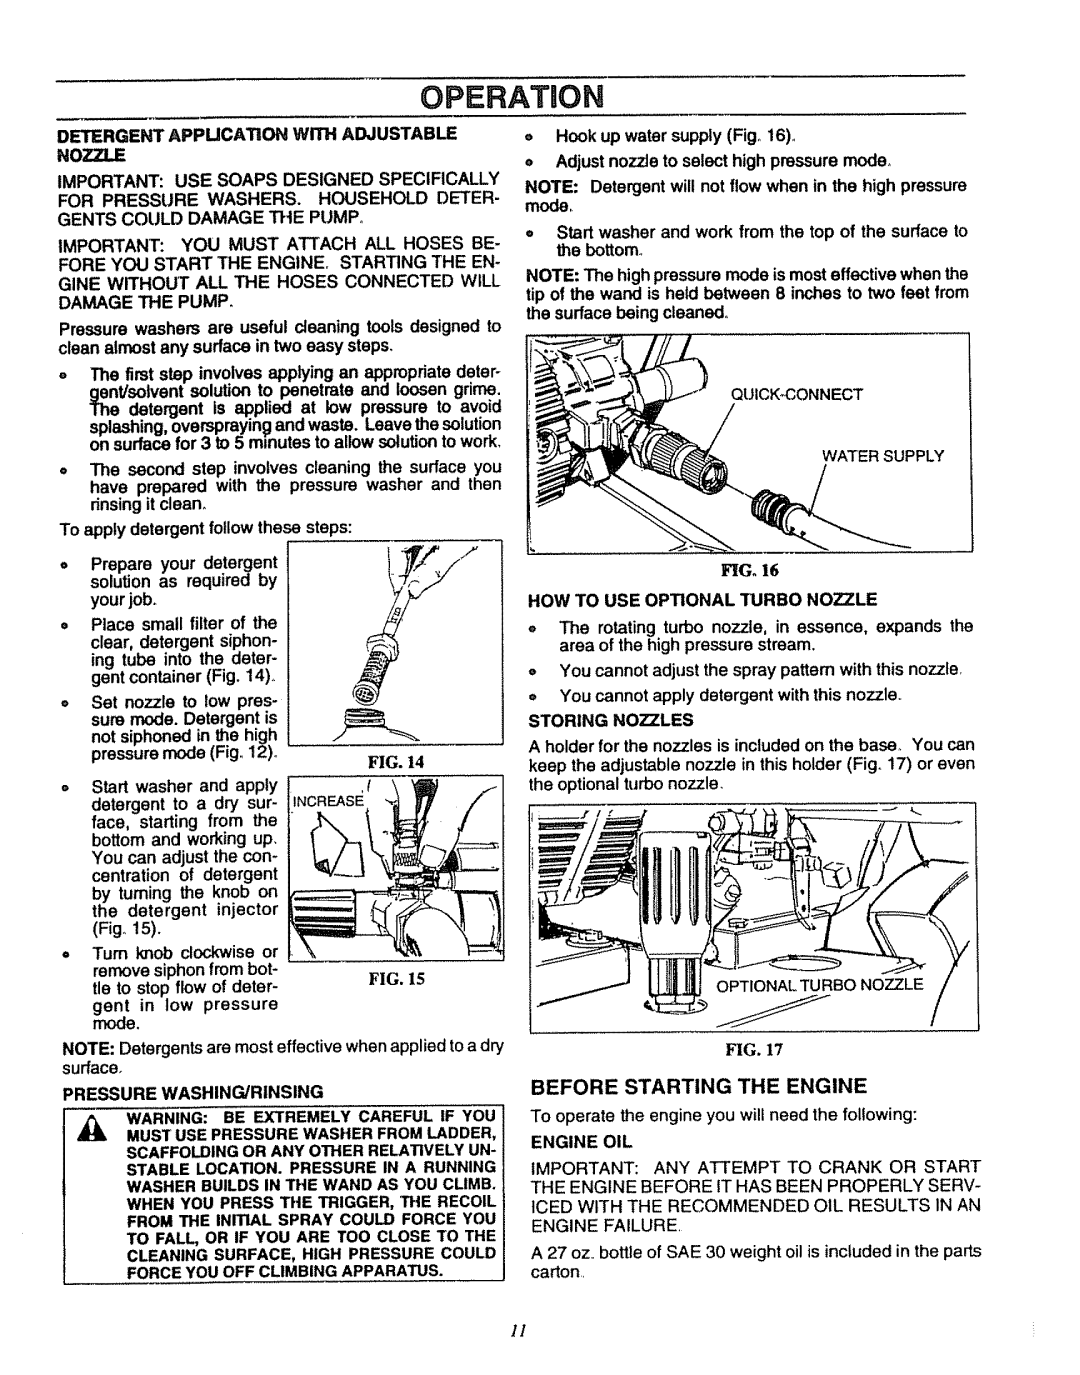 Sears 580.7515 manual Operation, Before Starting The Engine, Fig 